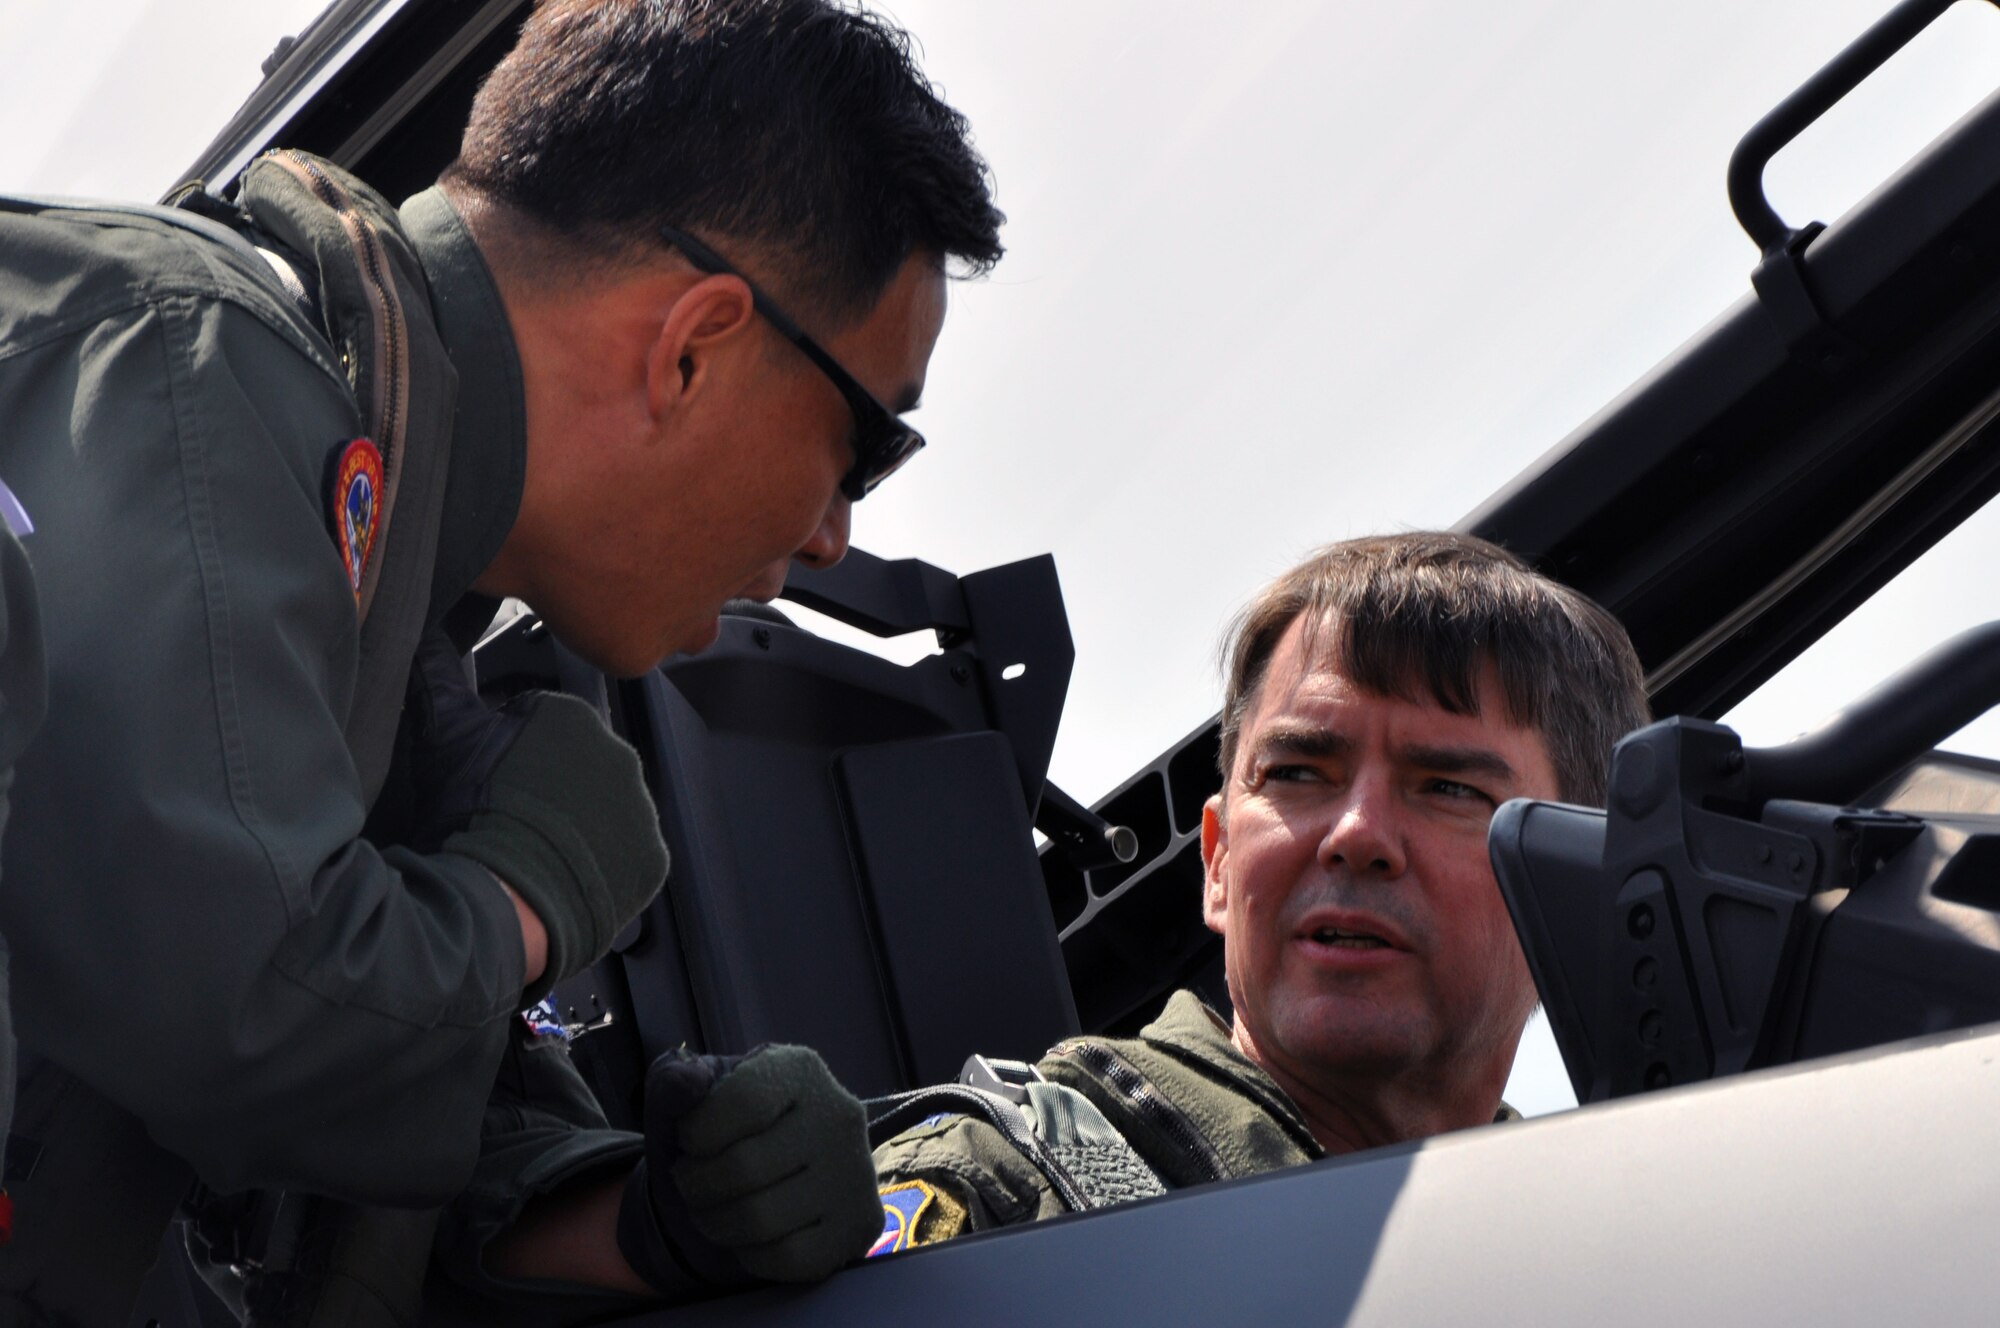 Lt. Gen. Jan-Marc Jouas, 7th Air Force commander, receives a brief before flying in a Republic of Korea F-15K Slam Eagle at Gwangju Air Base, May 15, 2012. Jouas’s flight comes as part of Max Thunder, a two-week combined exercise putting the U.S. and ROK Air Forces to work together through a variety of scenarios simulating operations against a hostile force. (U.S Air Force photo/Airman 1st Class Michael Battles)